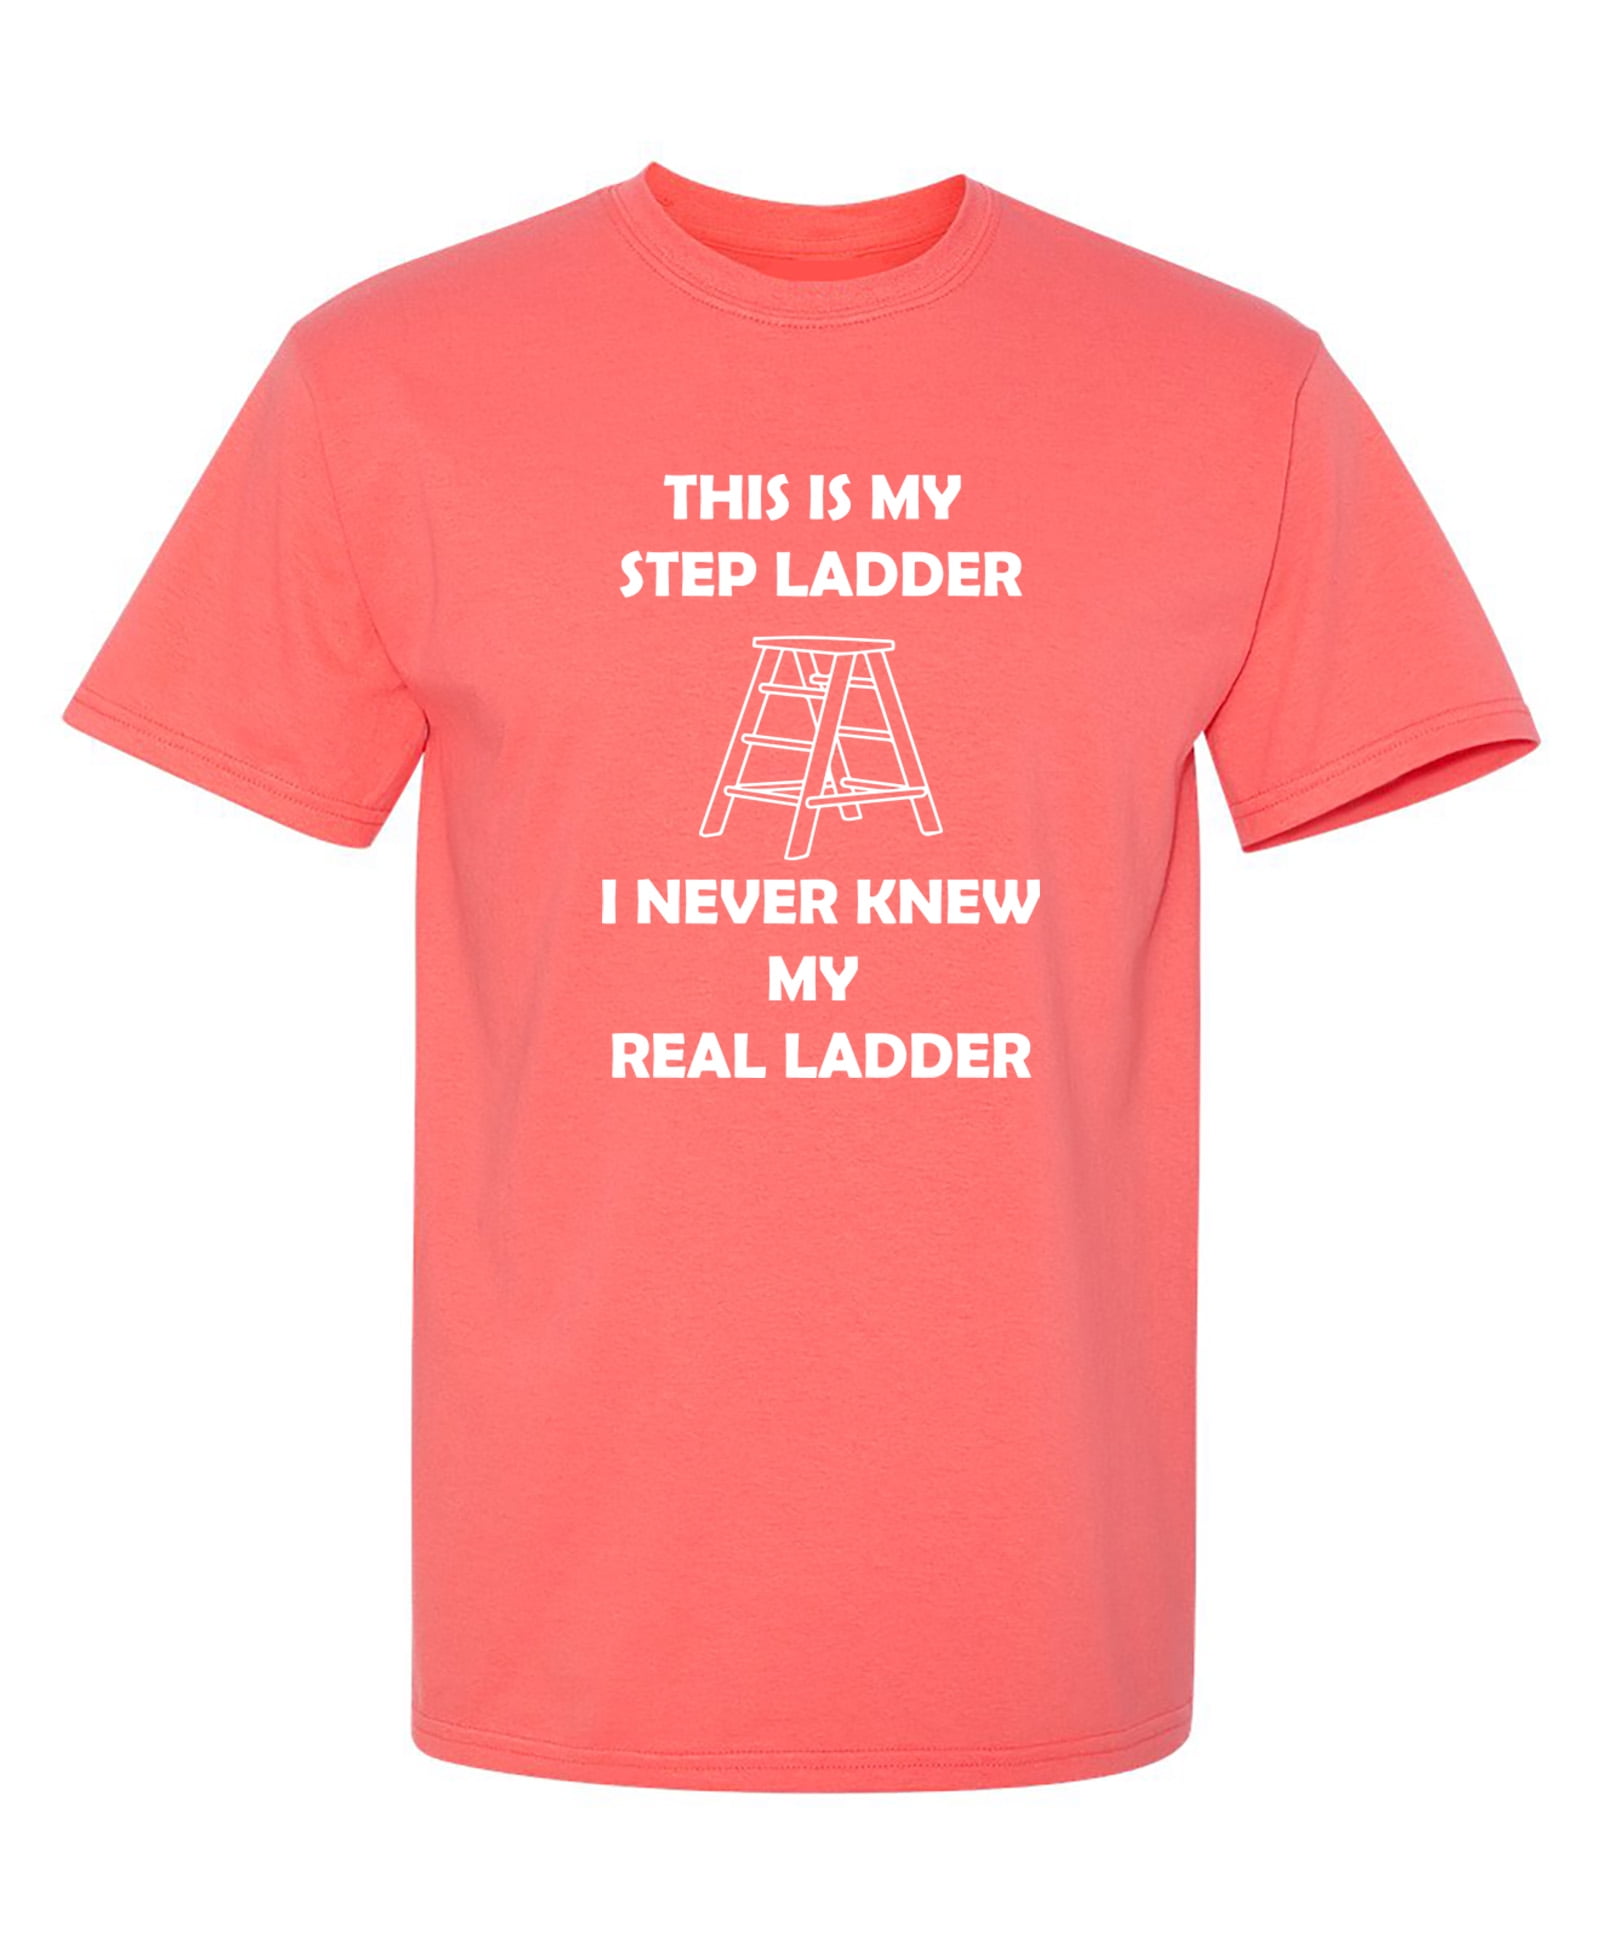 This is Step Ladder Sarcastic Humor Graphic Funny T Shirt - Walmart.com